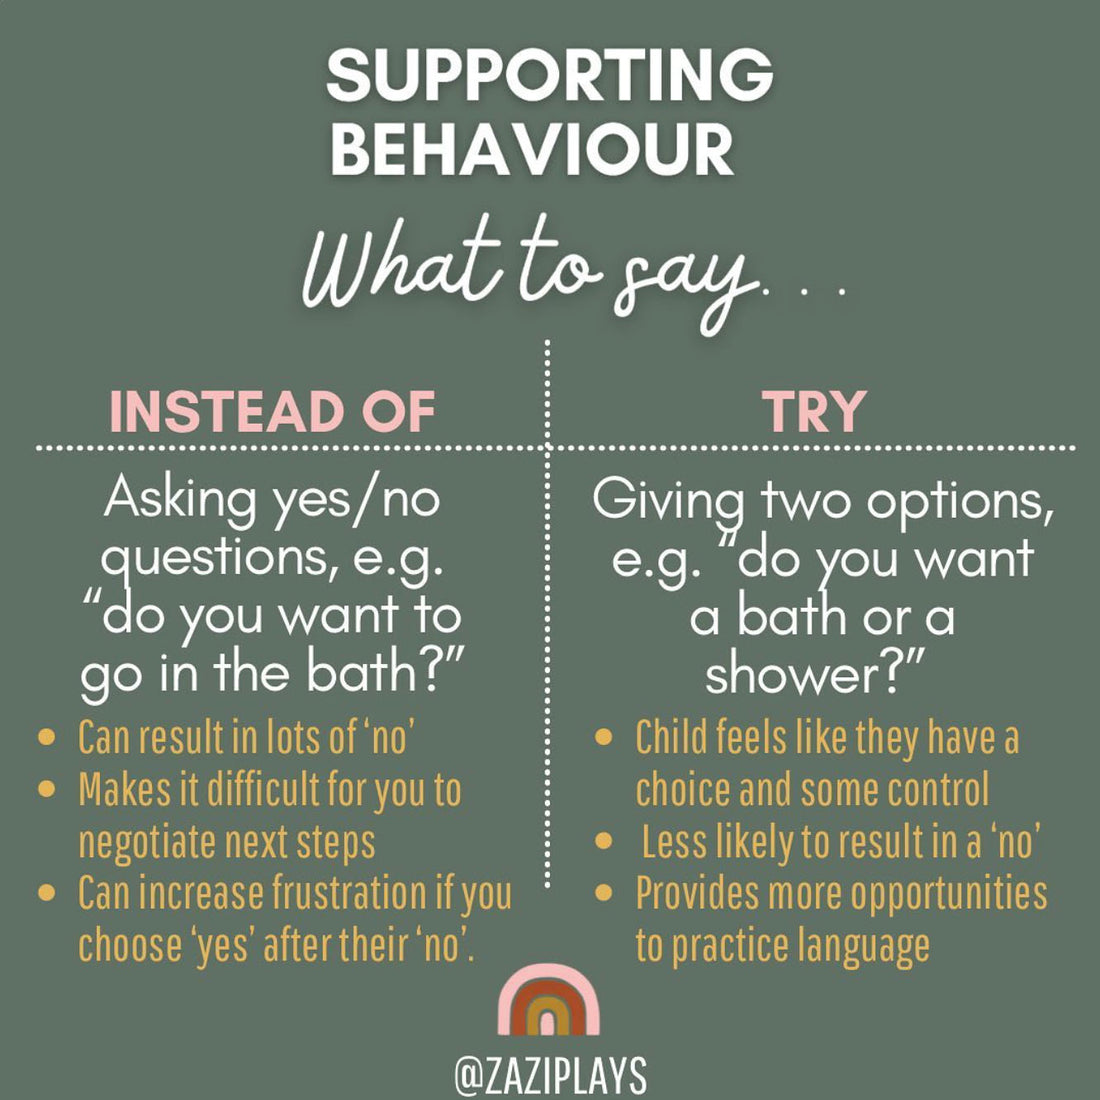 Supporting Behaviour: What to say